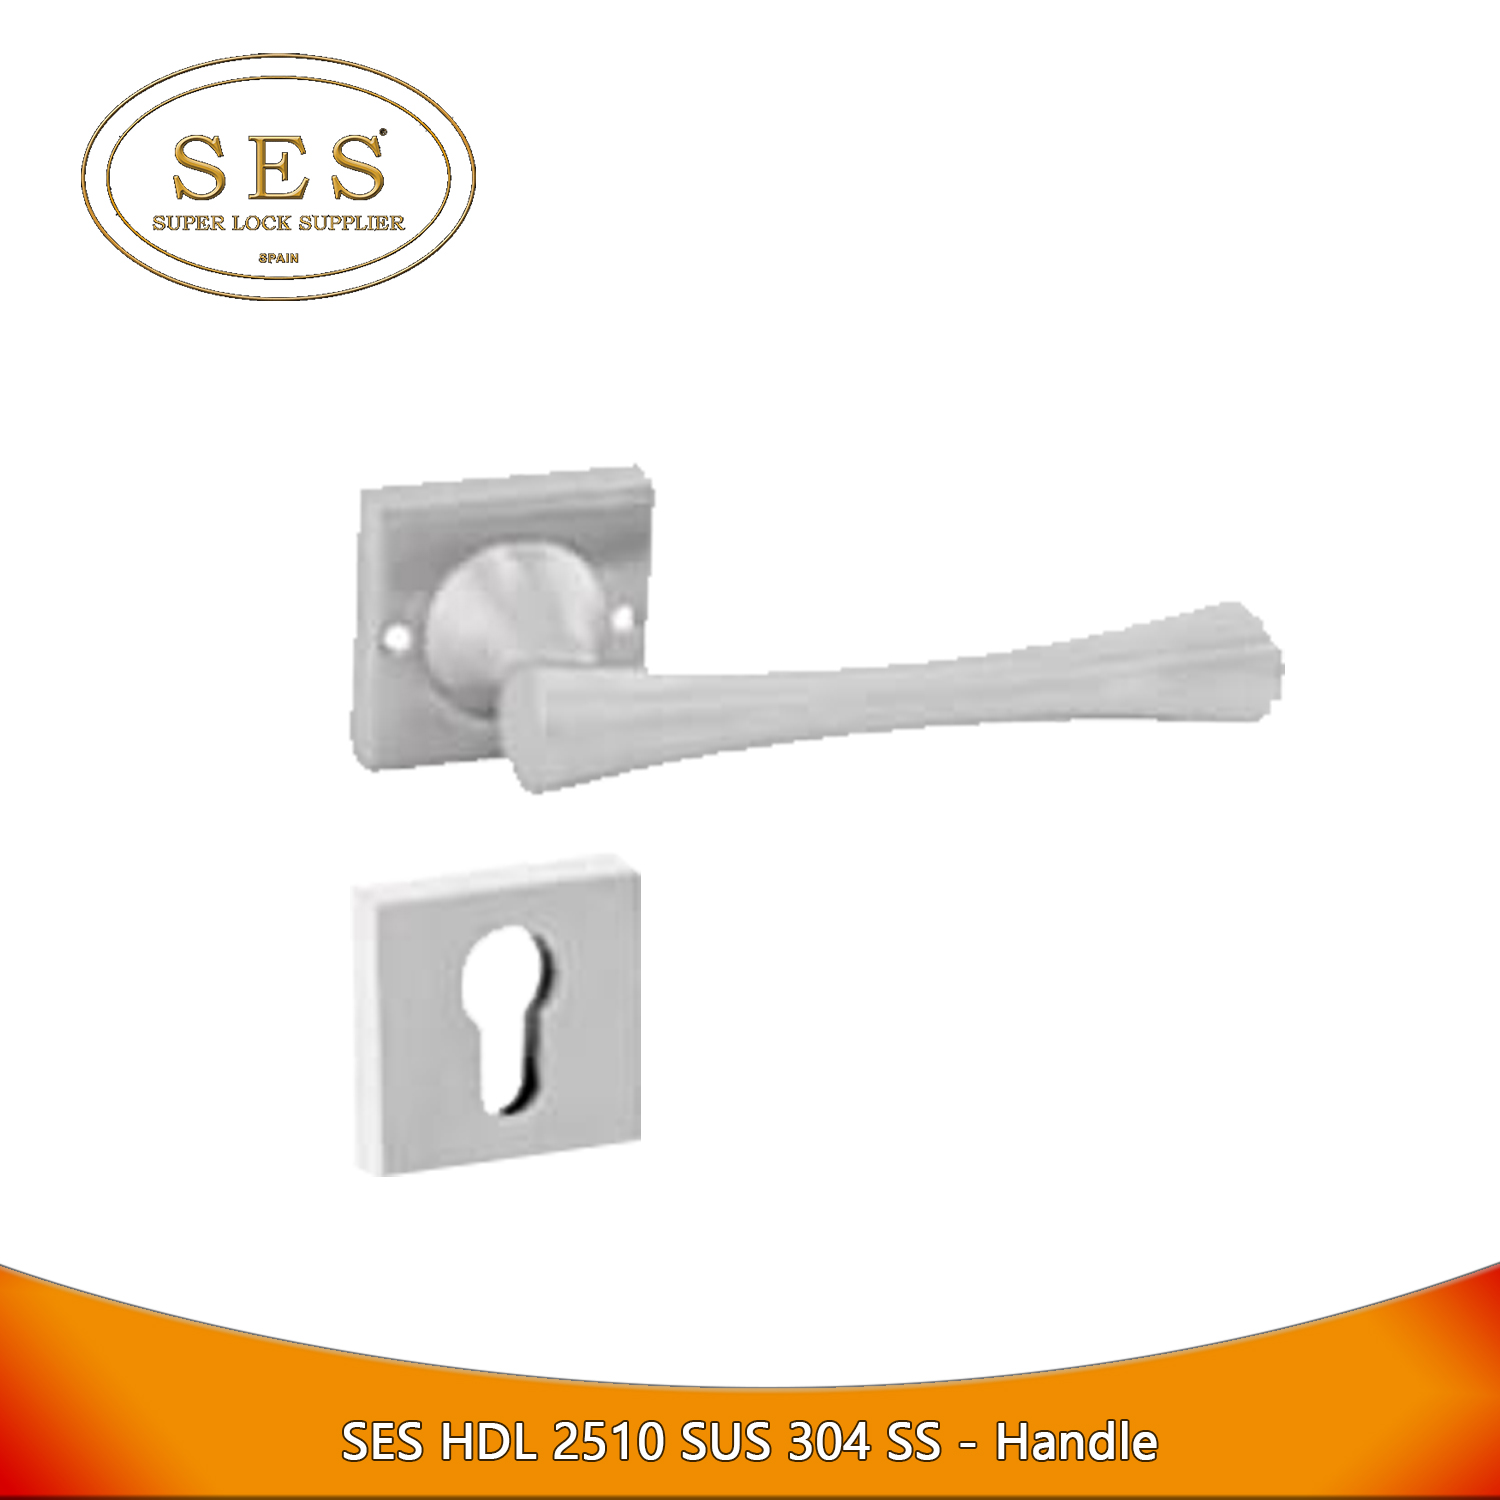 SES HDL 2510 SUS 304 SS - Handle